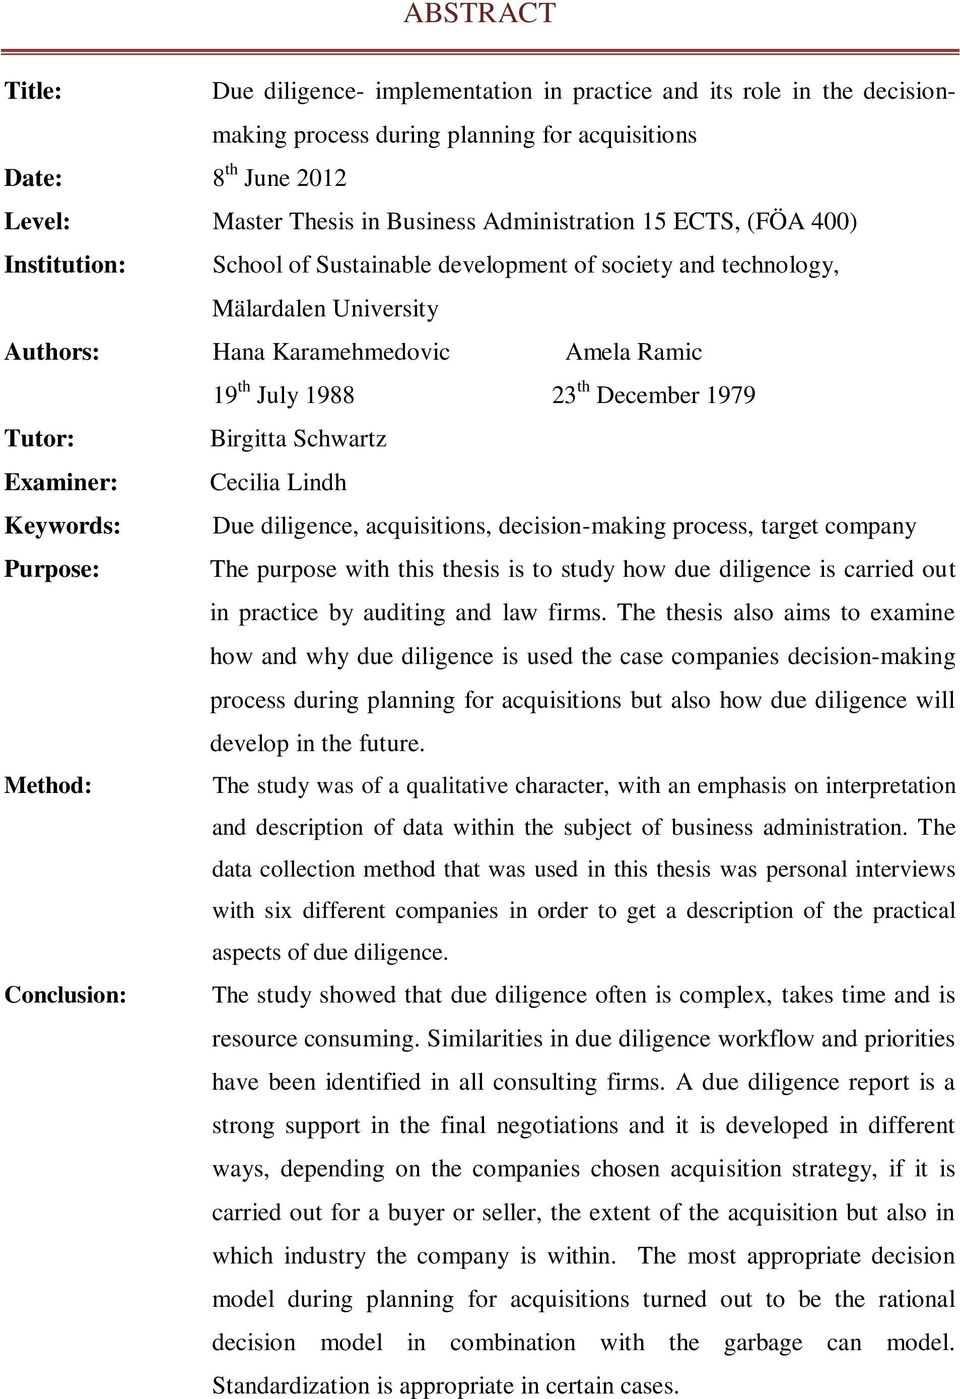 December 1979 Tutor: Birgitta Schwartz Examiner: Cecilia Lindh Keywords: Due diligence, acquisitions, decision-making process, target company Purpose: The purpose with this thesis is to study how due